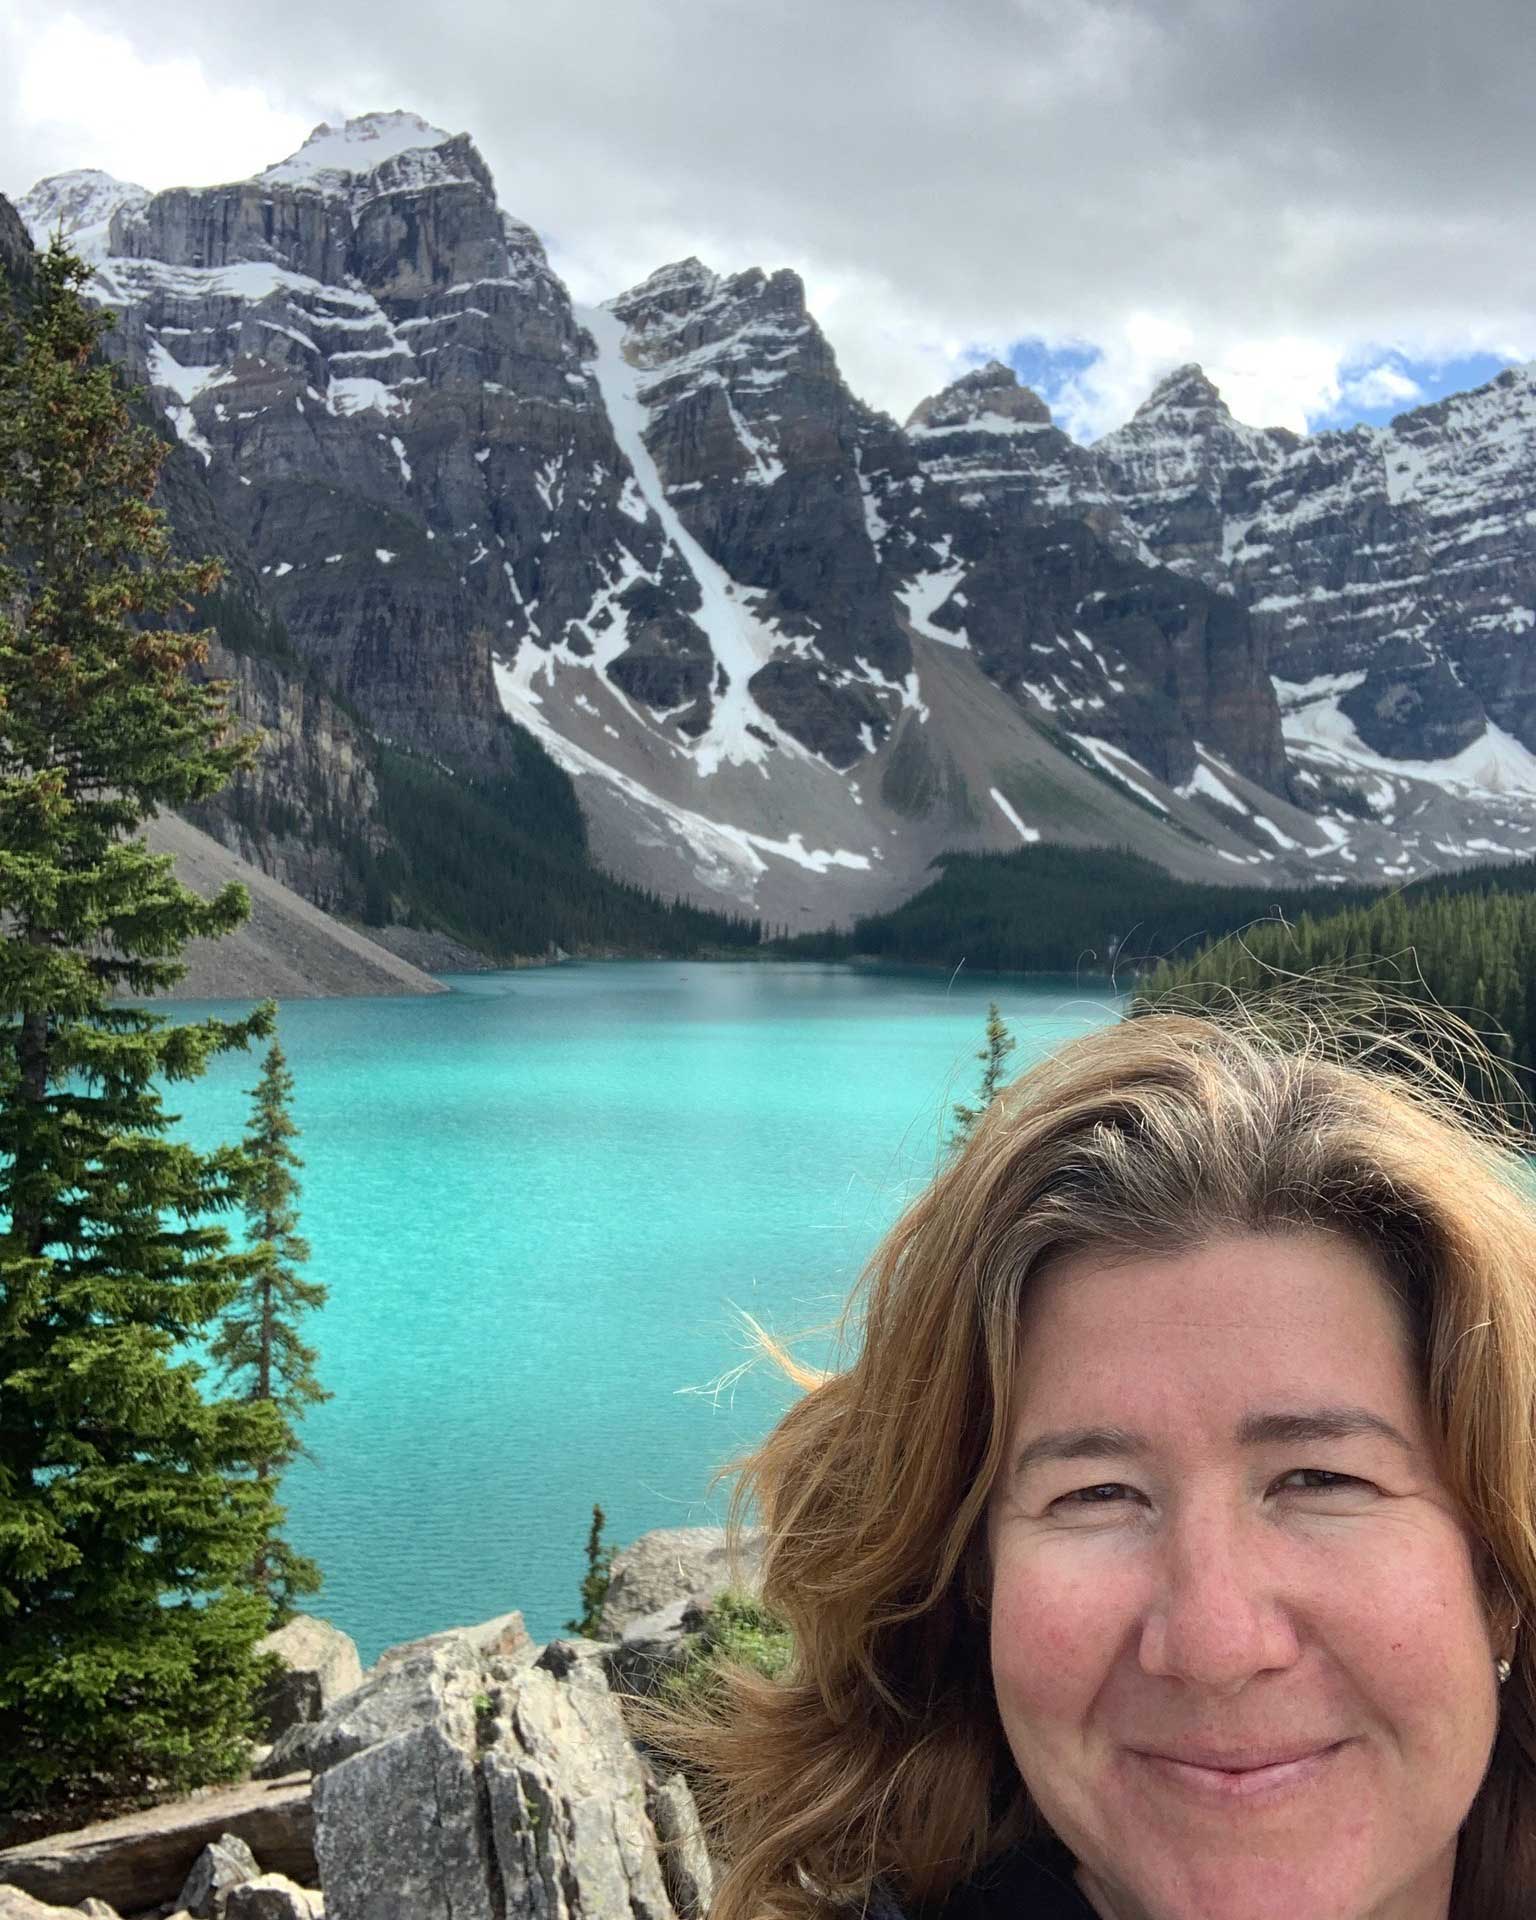 Pedego Canmore owner Amy at Moraine Lake near Lake Louise.